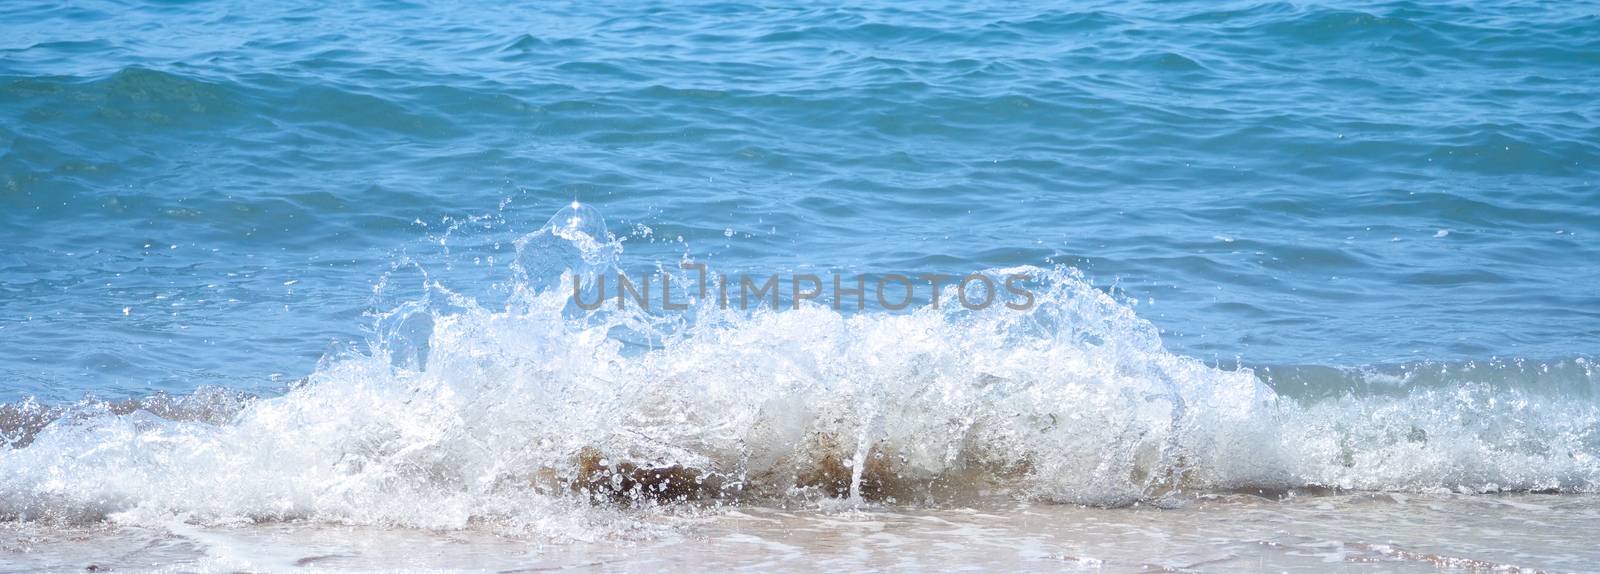 Clear light blue color sea water or liquid marine waving and splashing to light brown color sand beach on summer day in Pattaya Thailand and no people swimming because of hot weather.